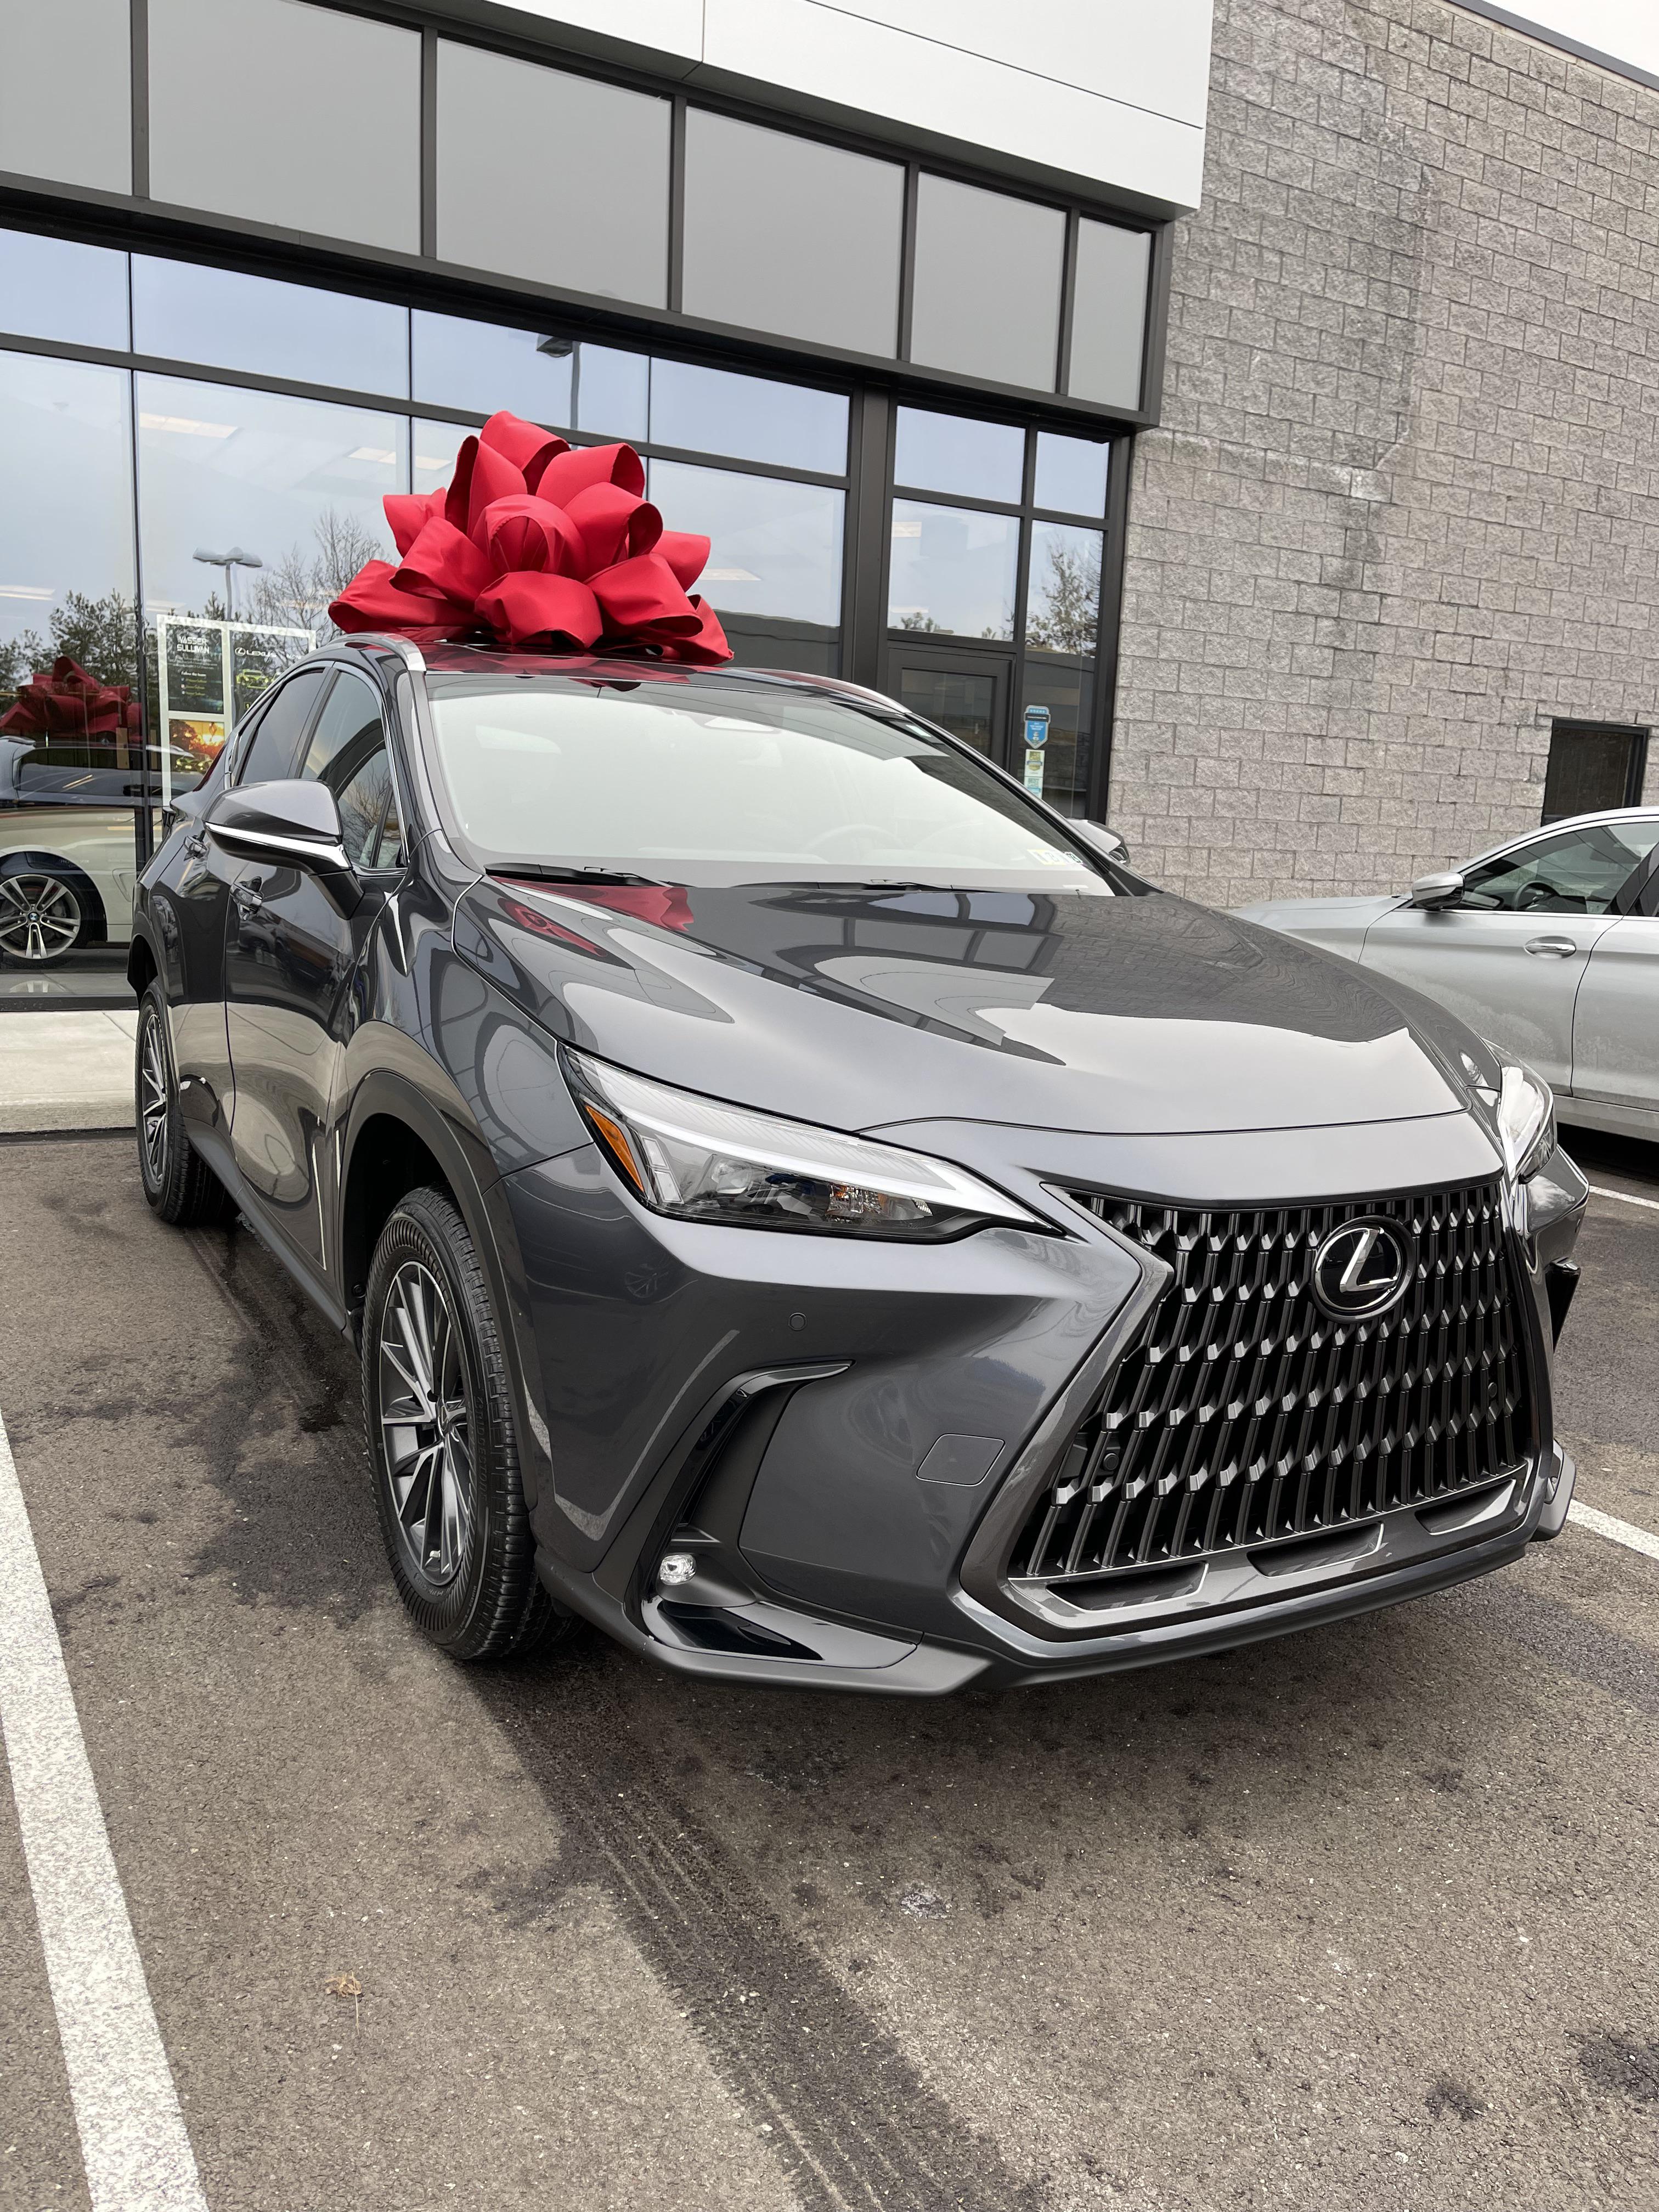 At 8 years old, I said my first car would be a Lexus. At 20, I busted ass  and made it happen. 2022 Lexus NX 350h : r/Lexus